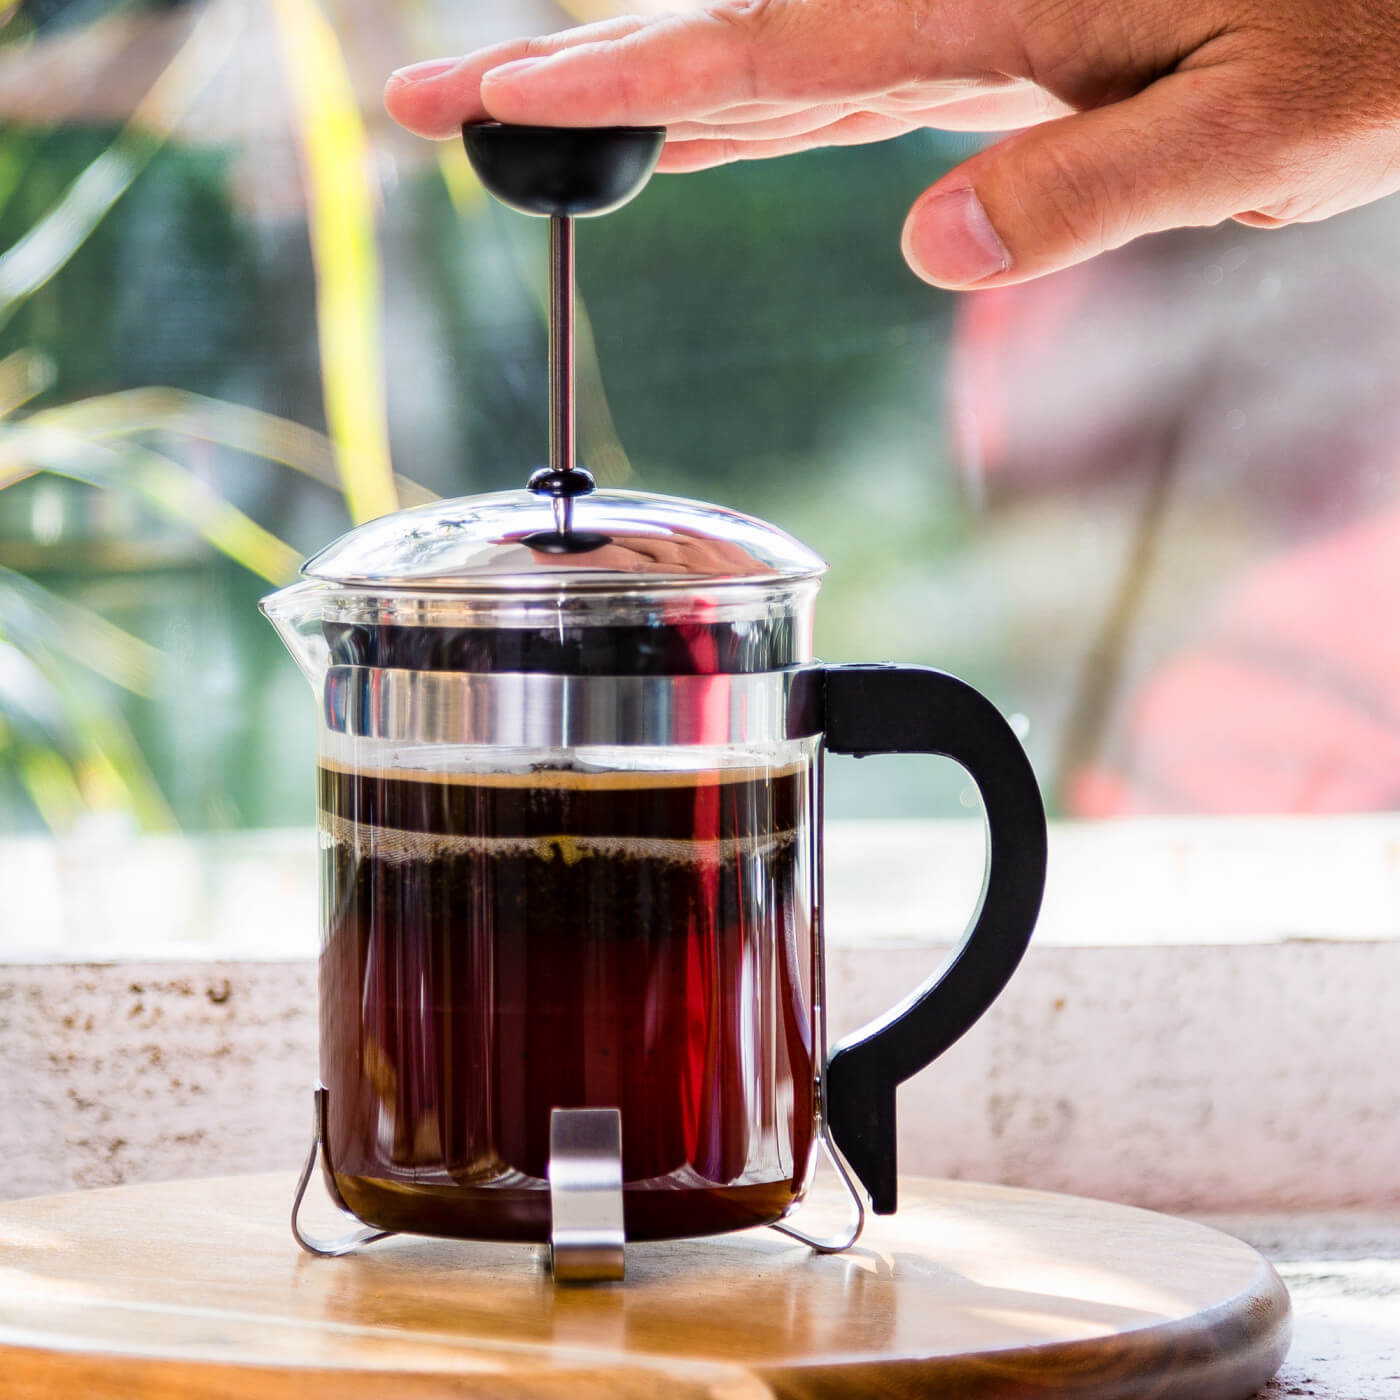 French Press Water Pour from Tea Pot